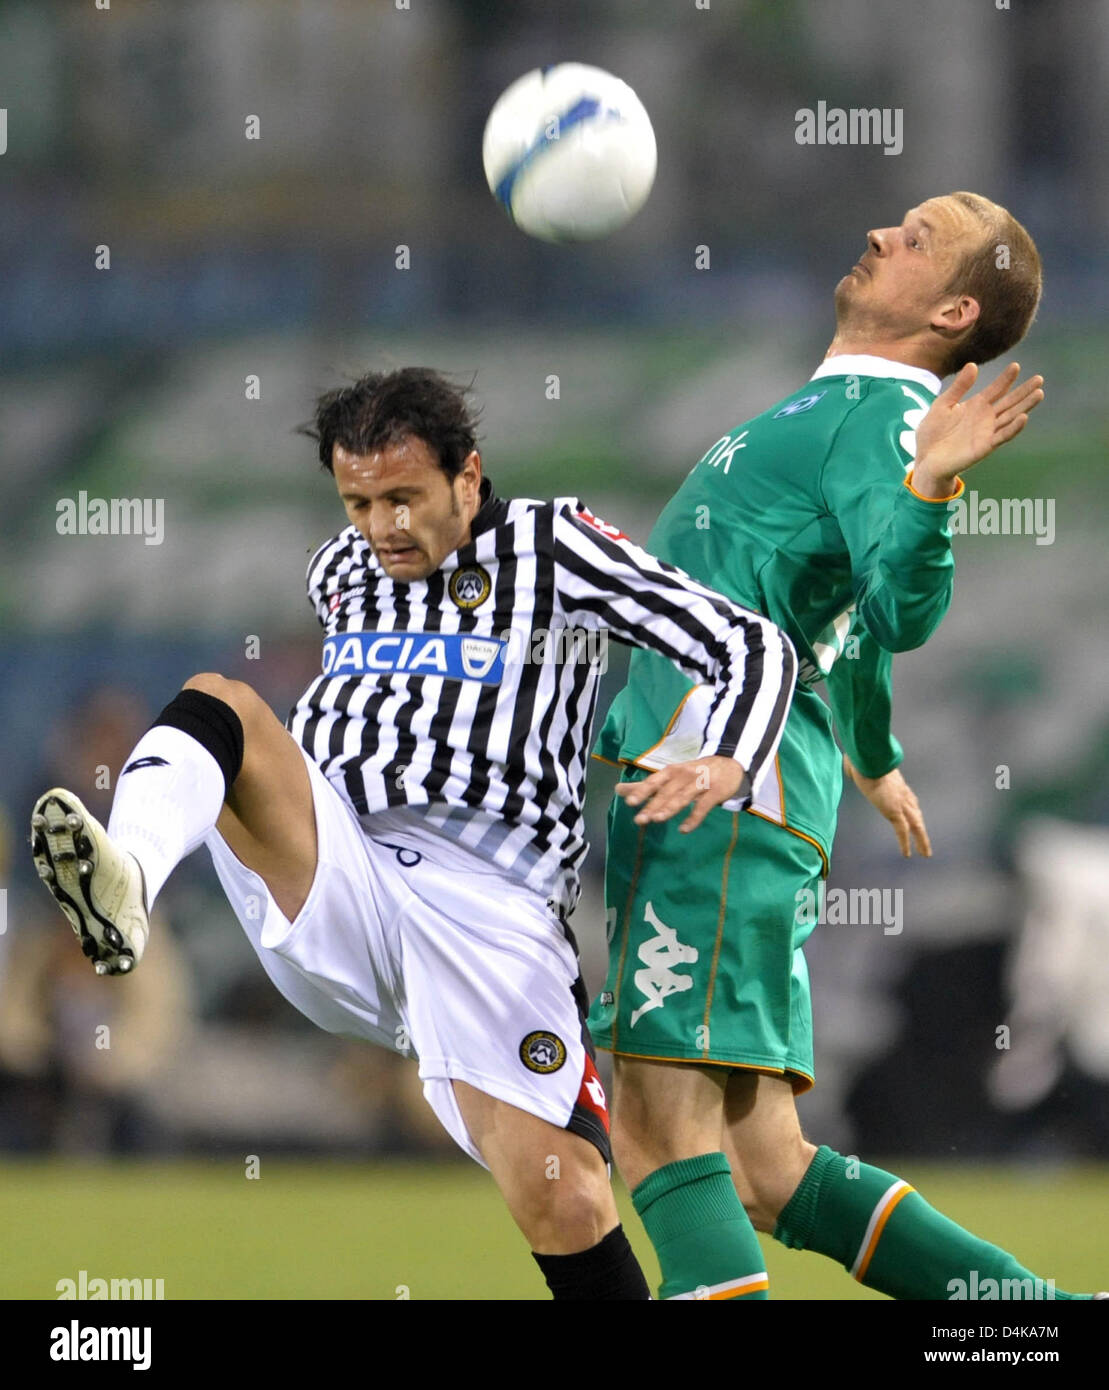 Bremen?s Petri Pasanen (R) vies for the ball with Udinese?s Gaetano D?Agostino during the UEFA Cup quarter finals second leg match Udinese vs Werder Bremen at Stadio Friuli in Udine, Italy, 16 April 2009. The match tied 3-3. Photo: Carmen Jaspersen Stock Photo